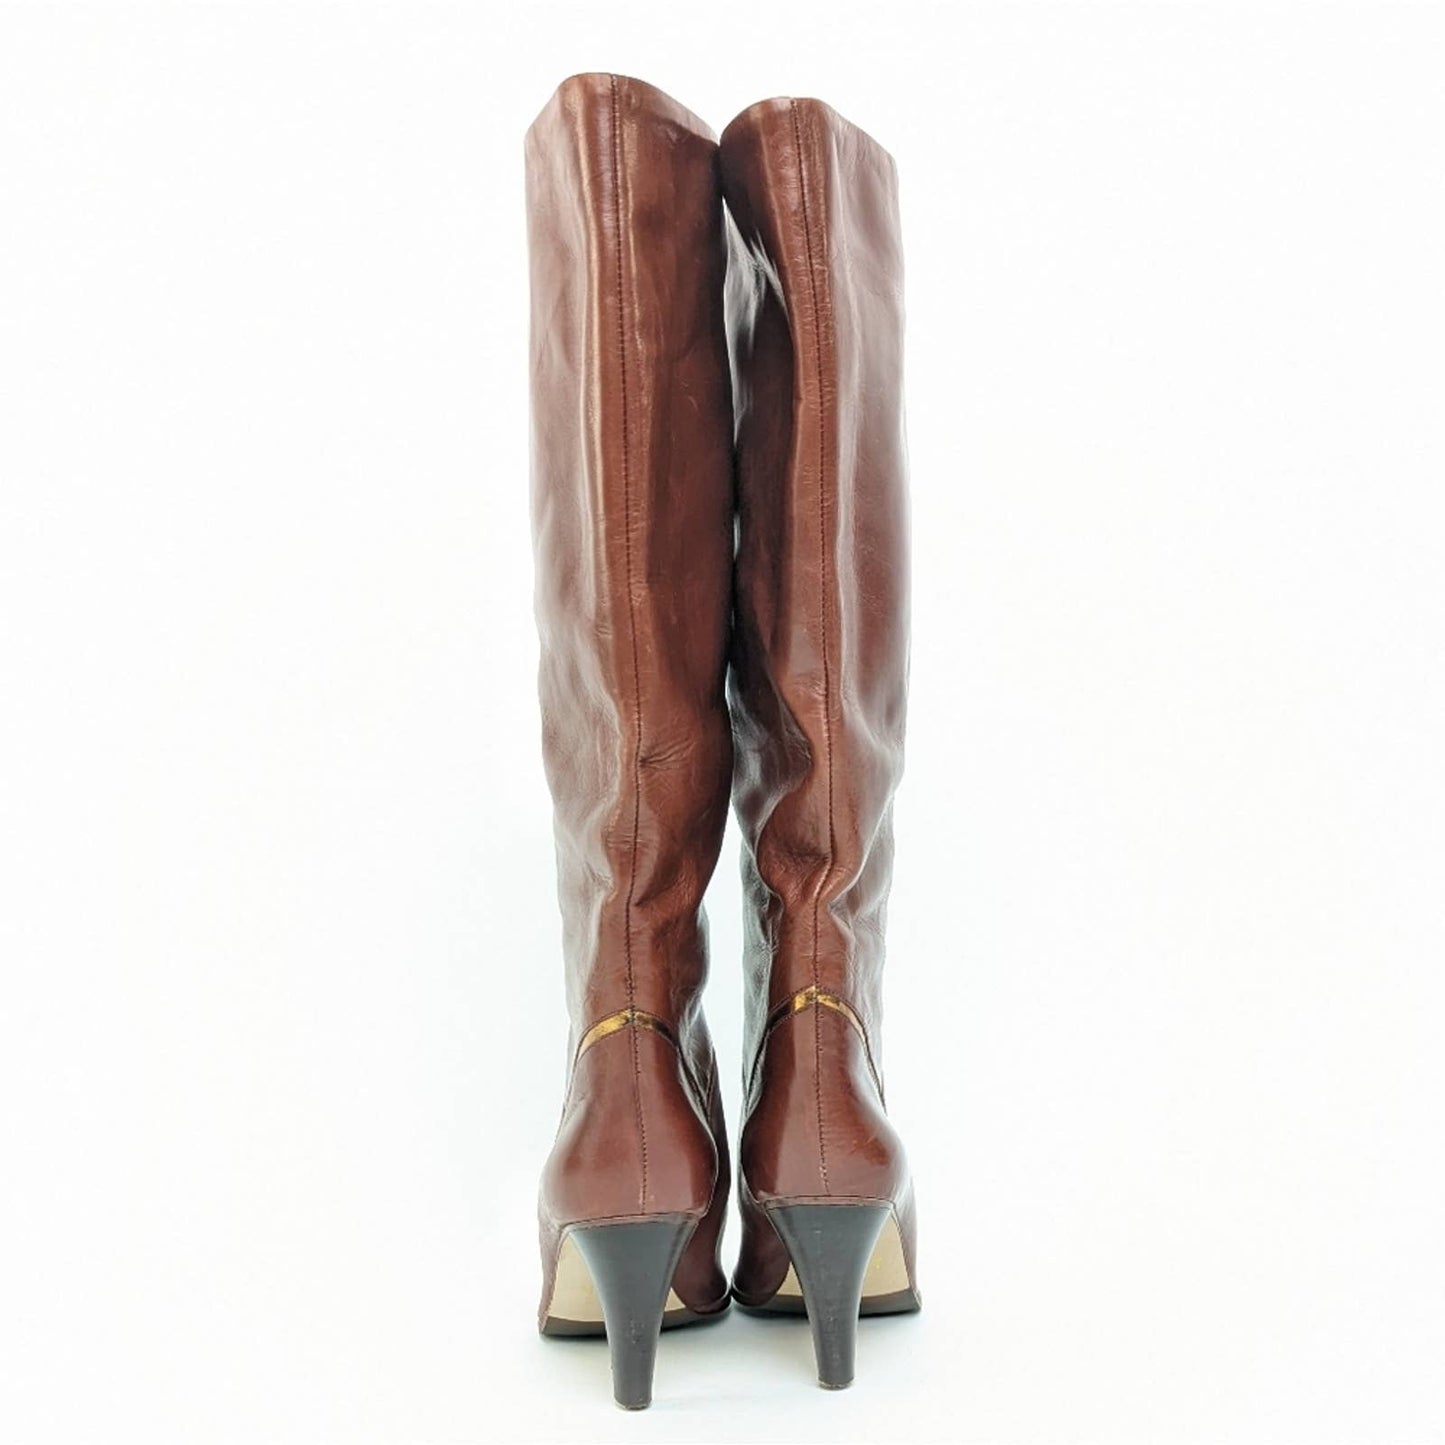 Nickels NWOT Soft Leather Knee High Riding Boots - 7.5